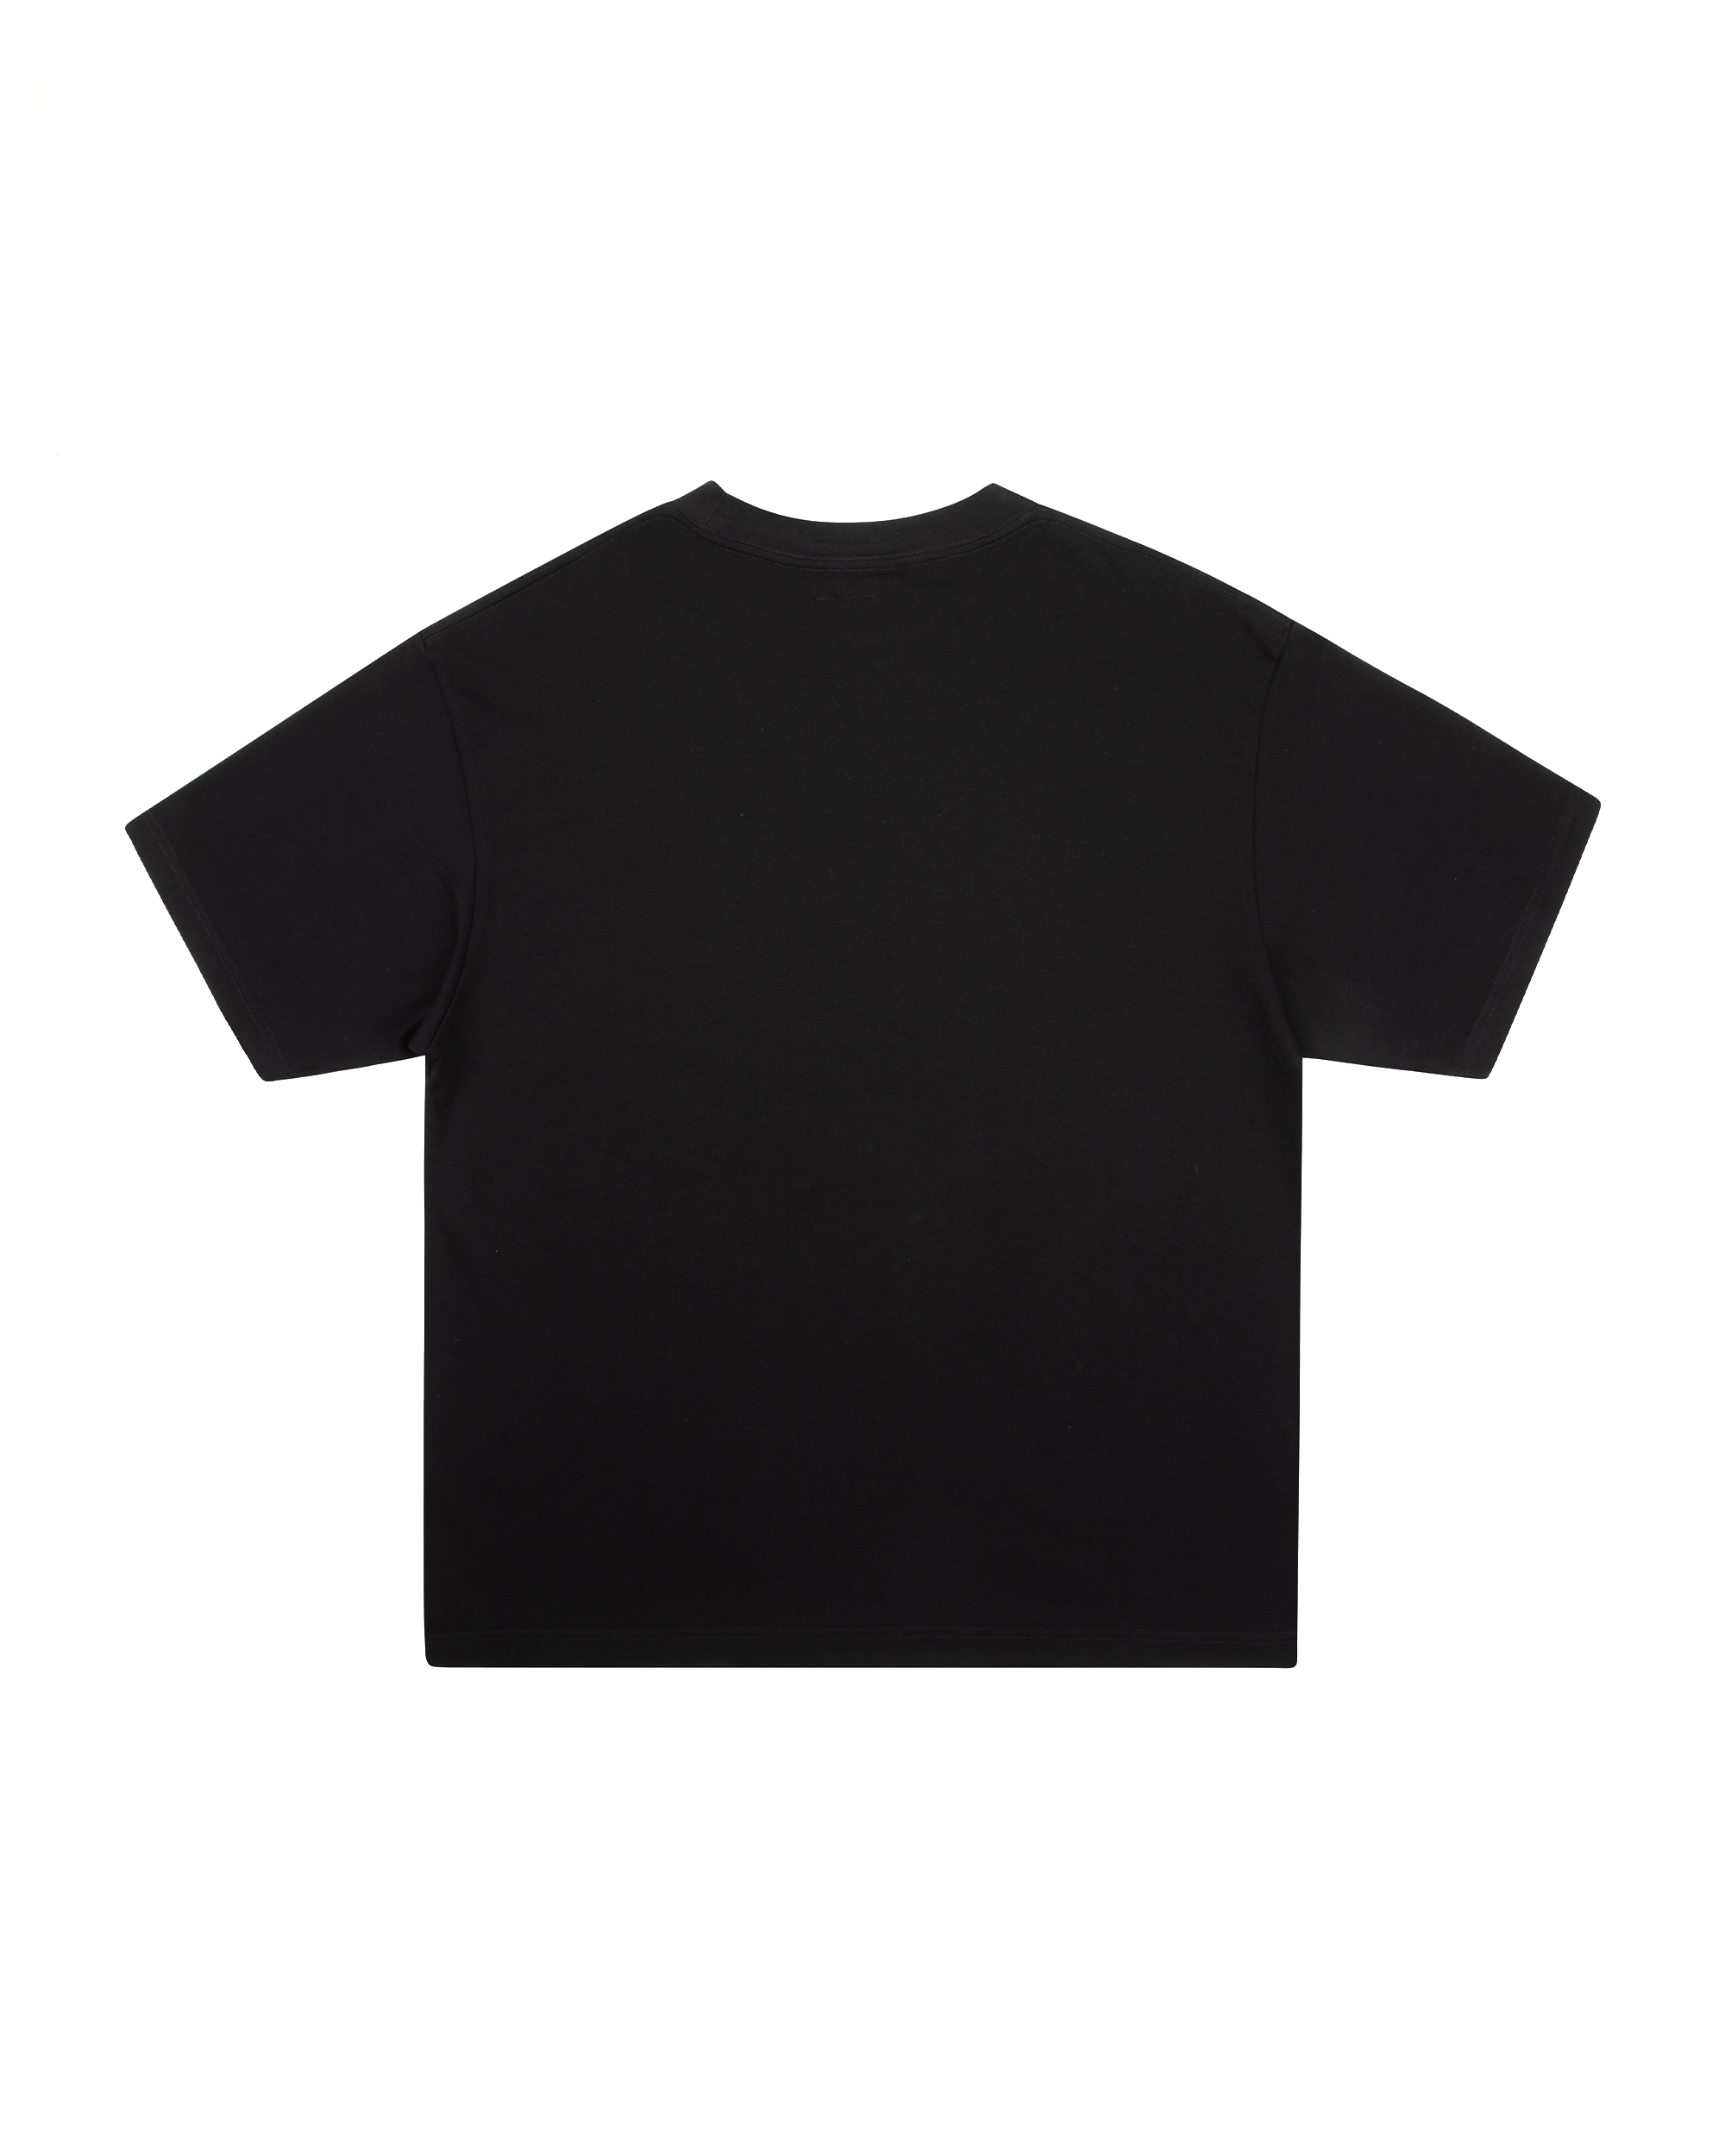 Friends and Family T-shirt - Black